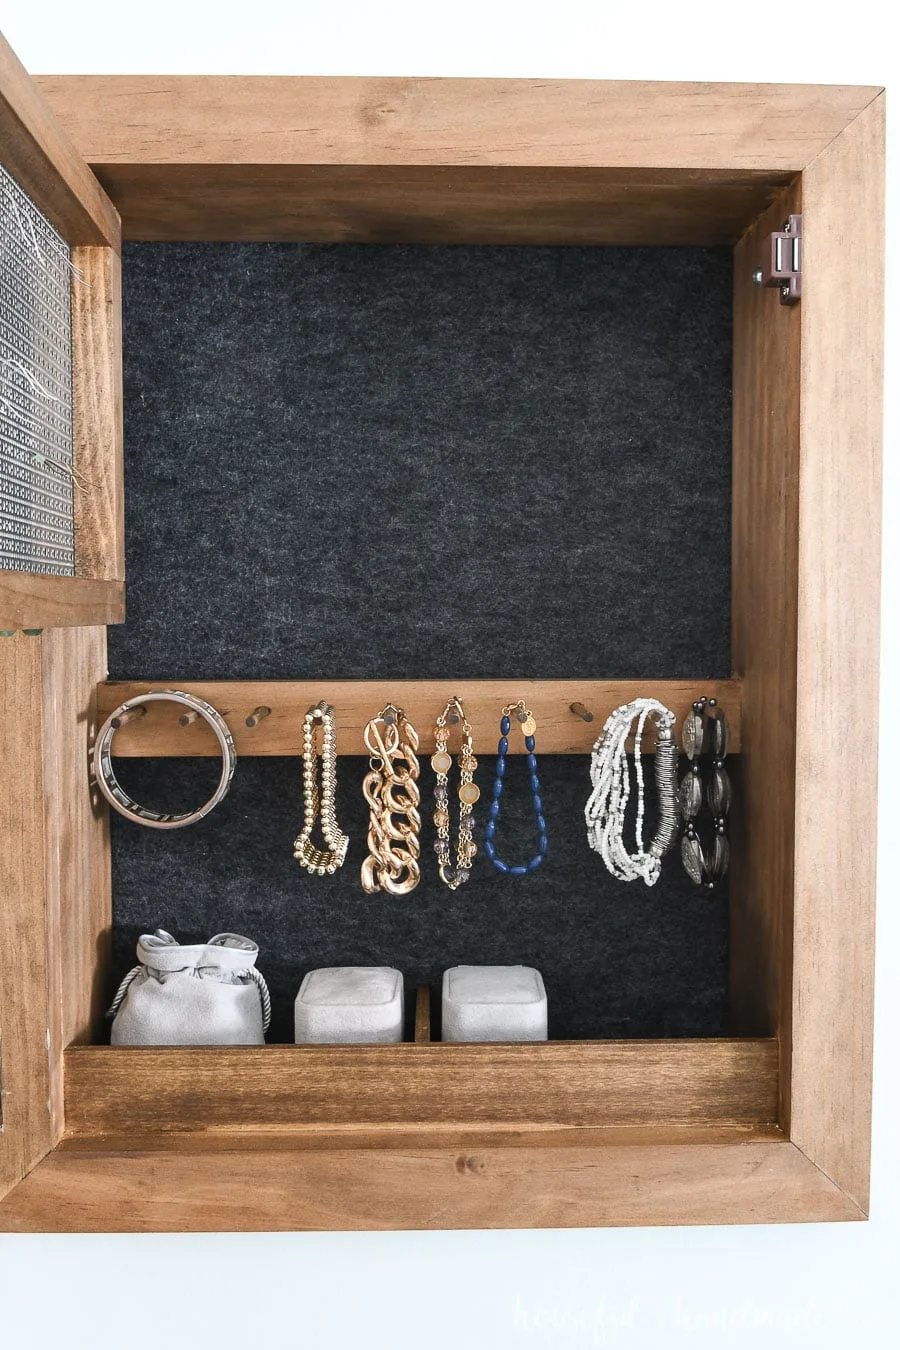 DIY jewelry cabinet opened up to see the felt back and bracelet rack.